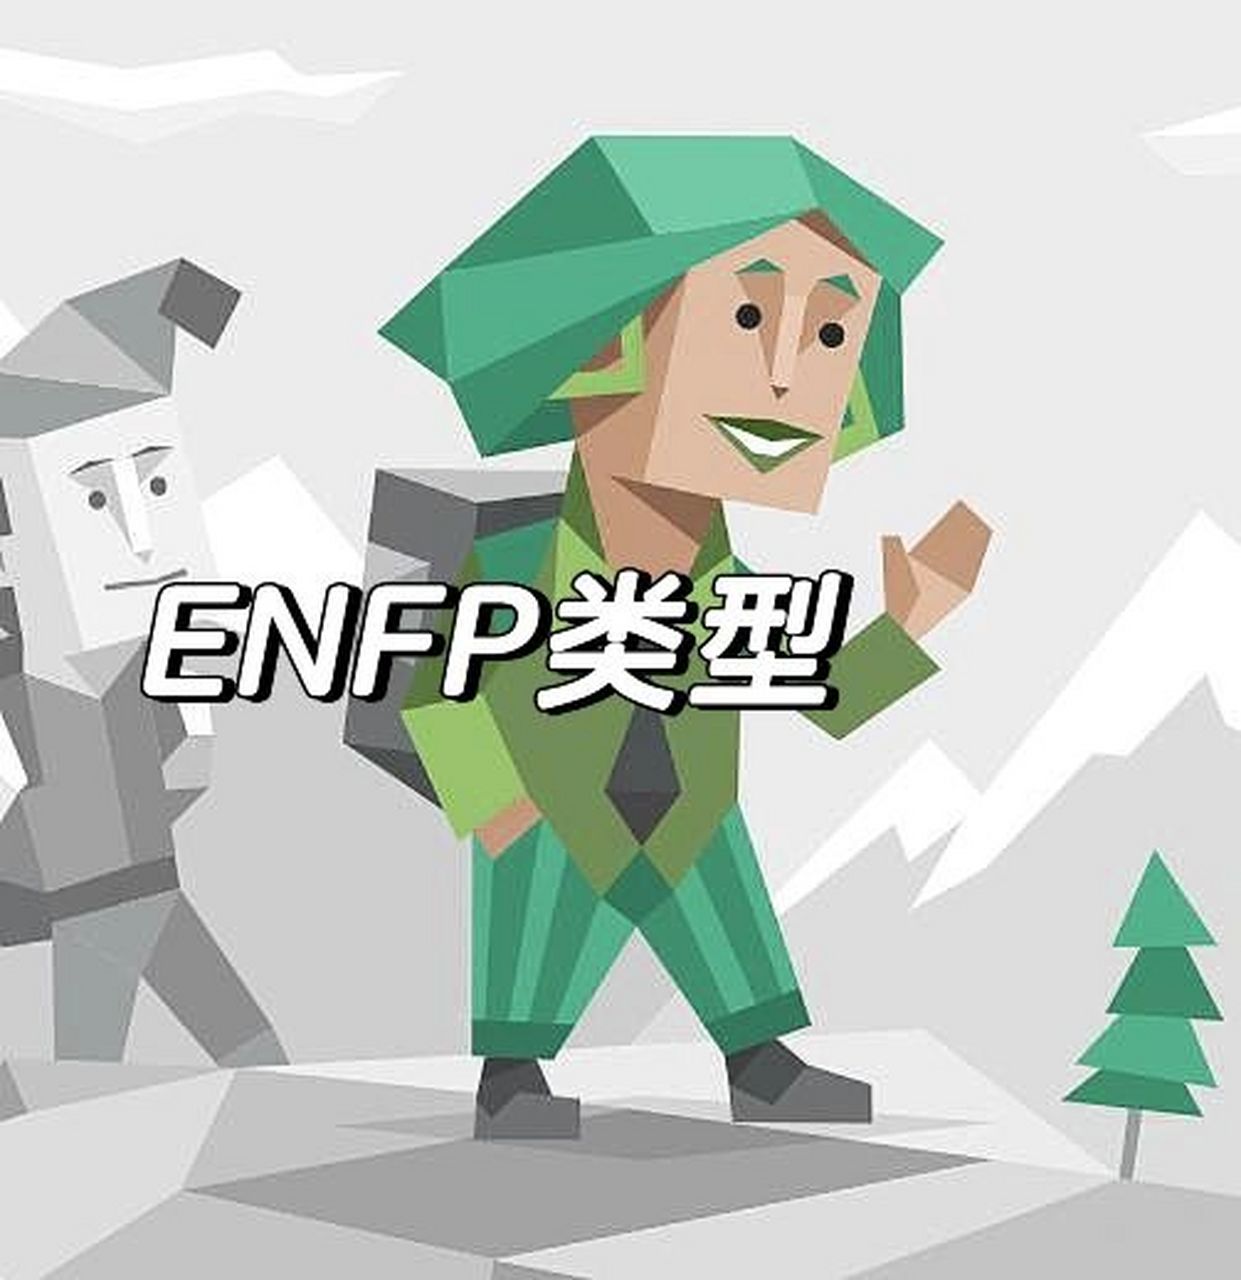 enfp代表人物图片